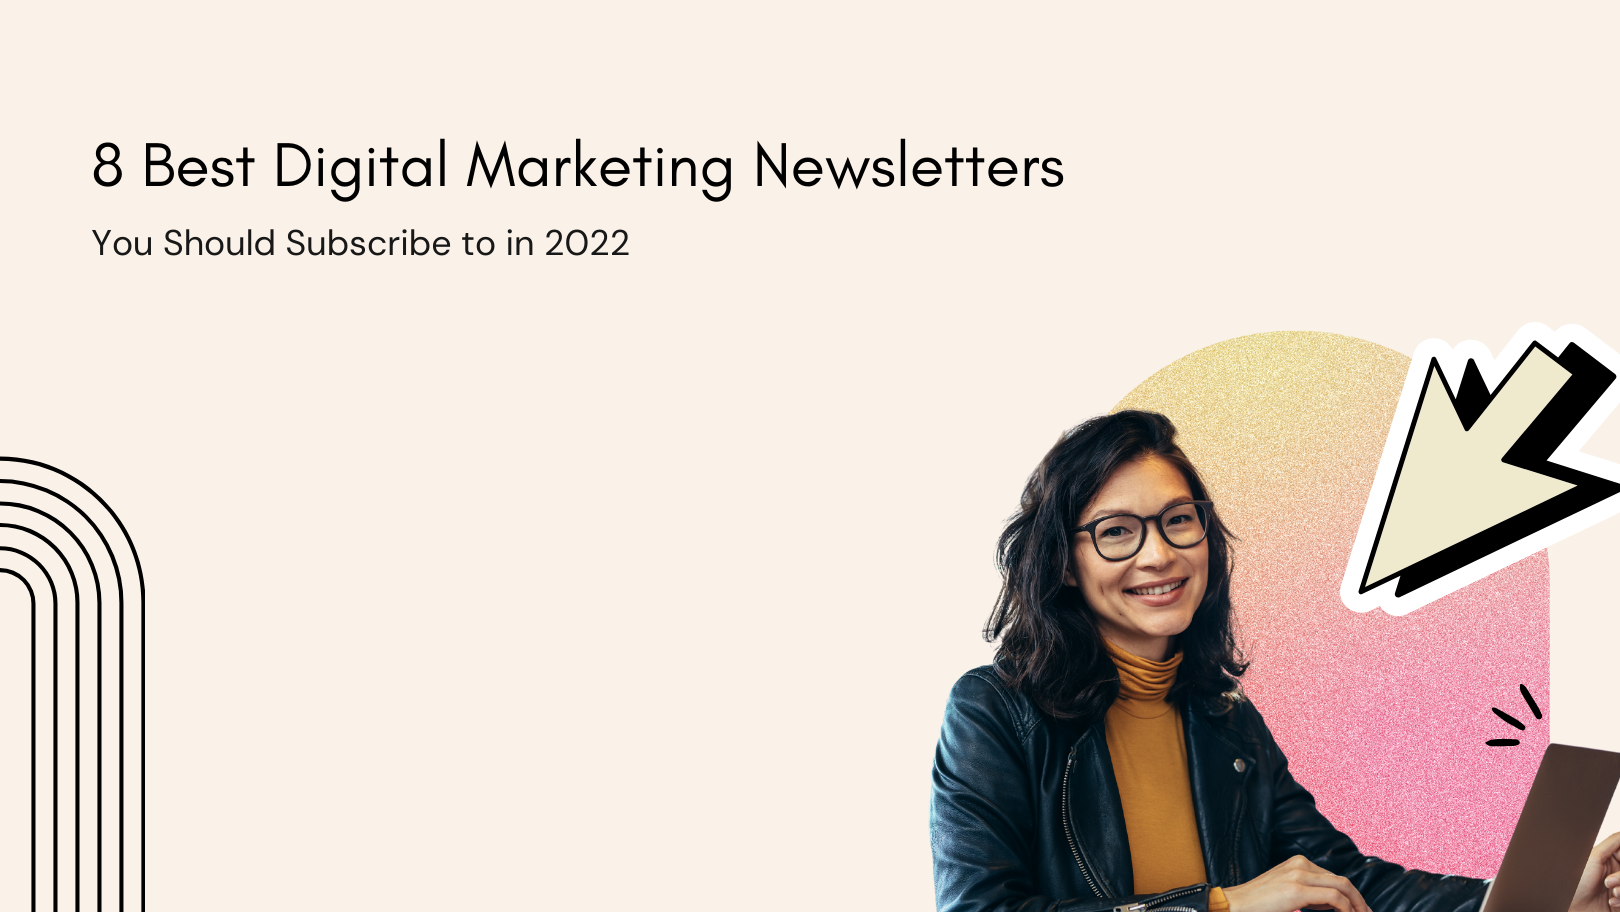 AV_8-best-digital-marketing-newsletters-you-should-subscribe-to-in-2022